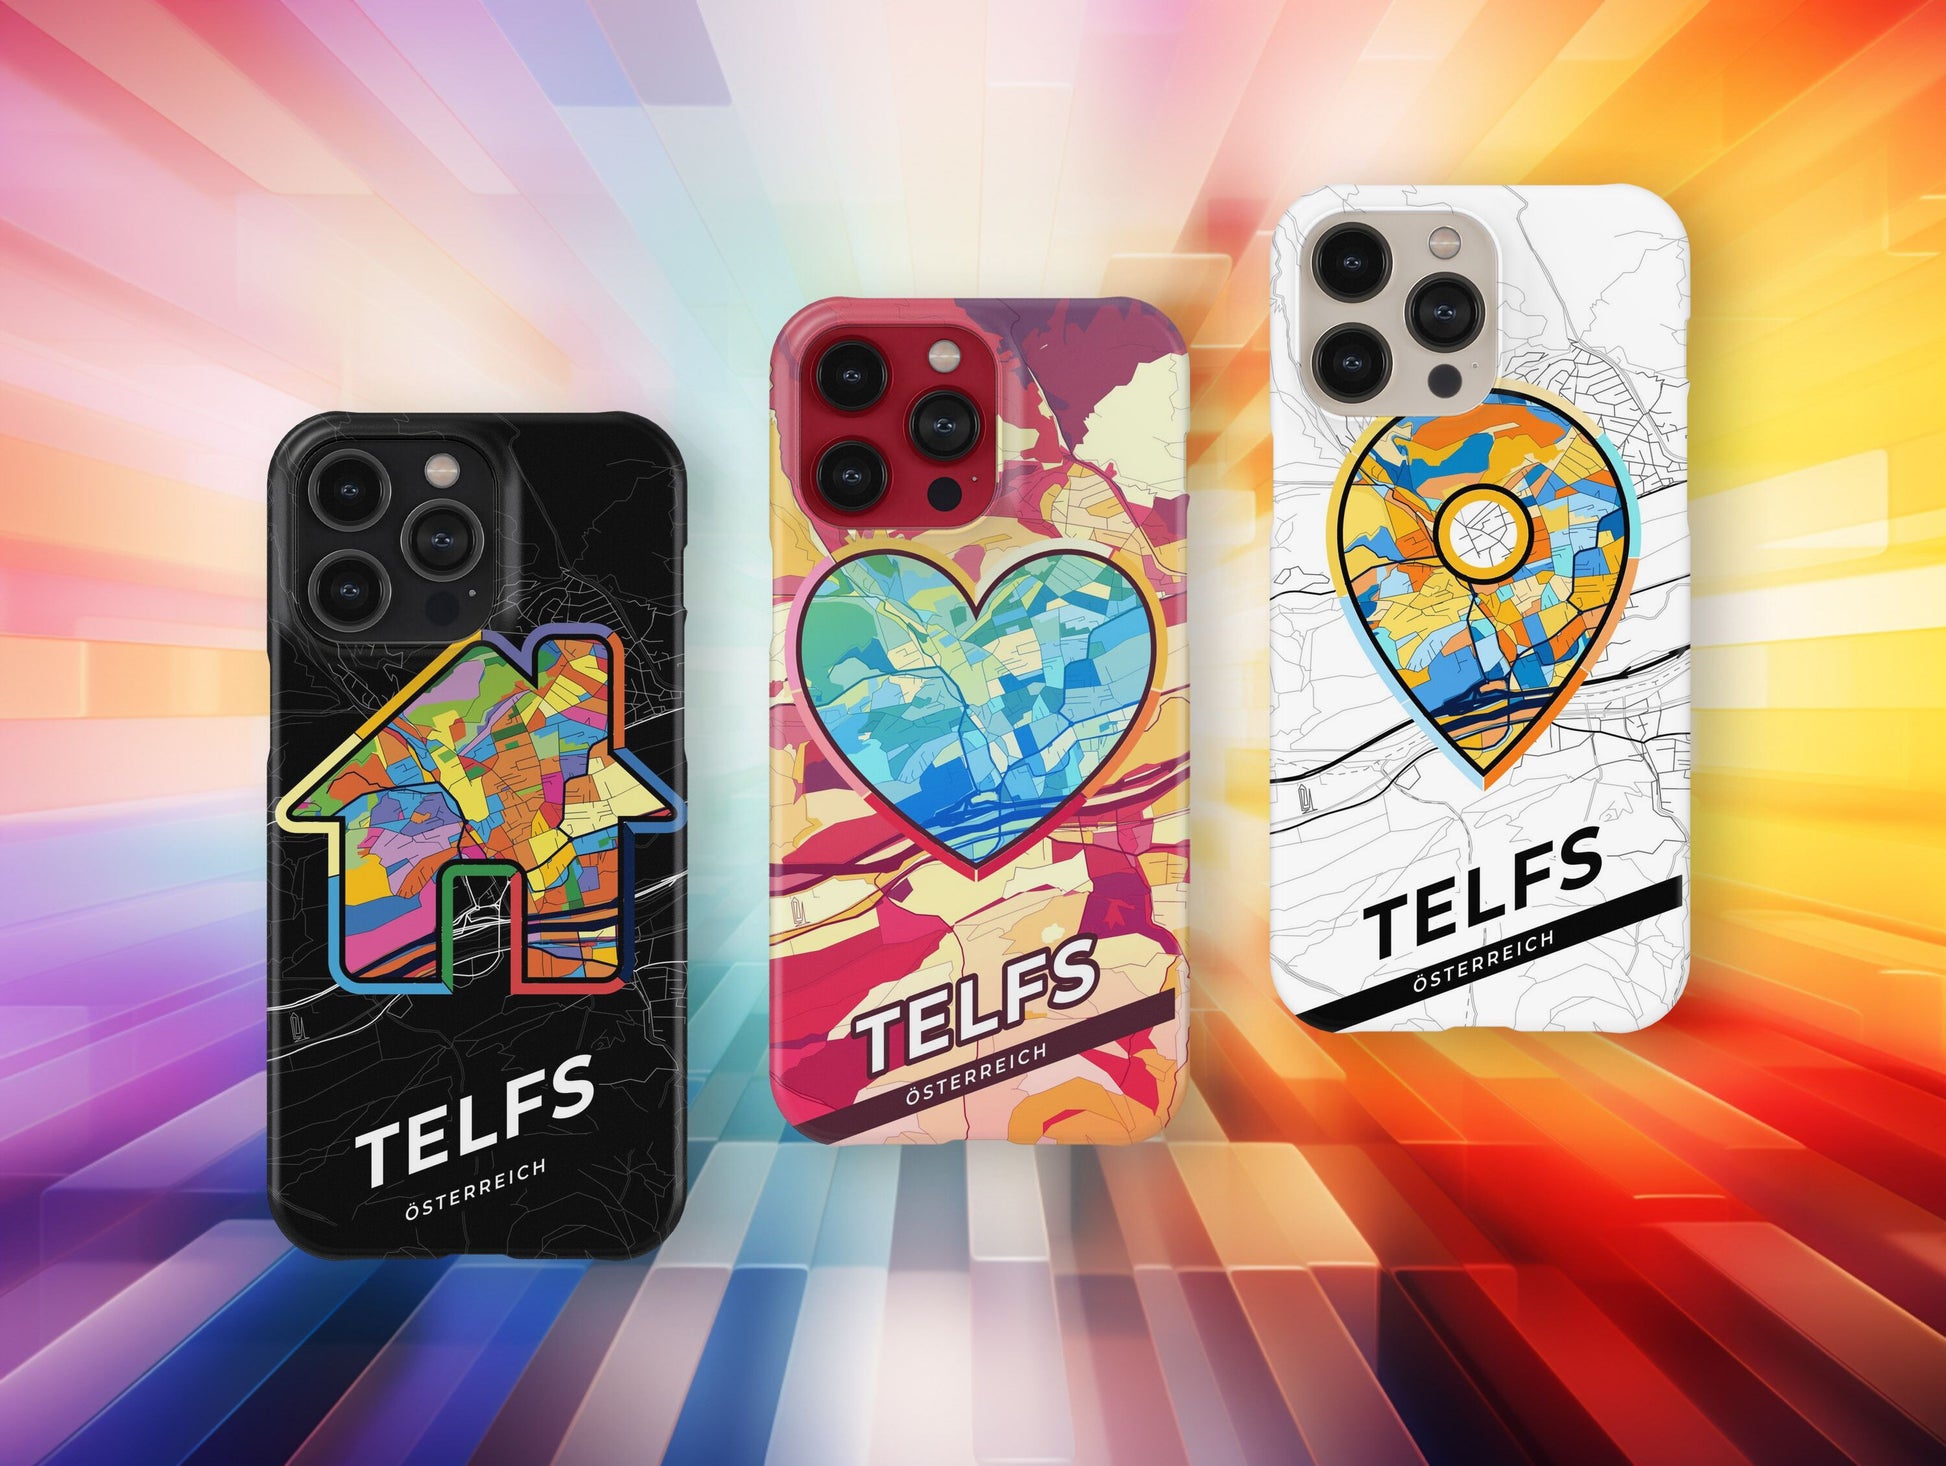 Telfs Österreich slim phone case with colorful icon. Birthday, wedding or housewarming gift. Couple match cases.